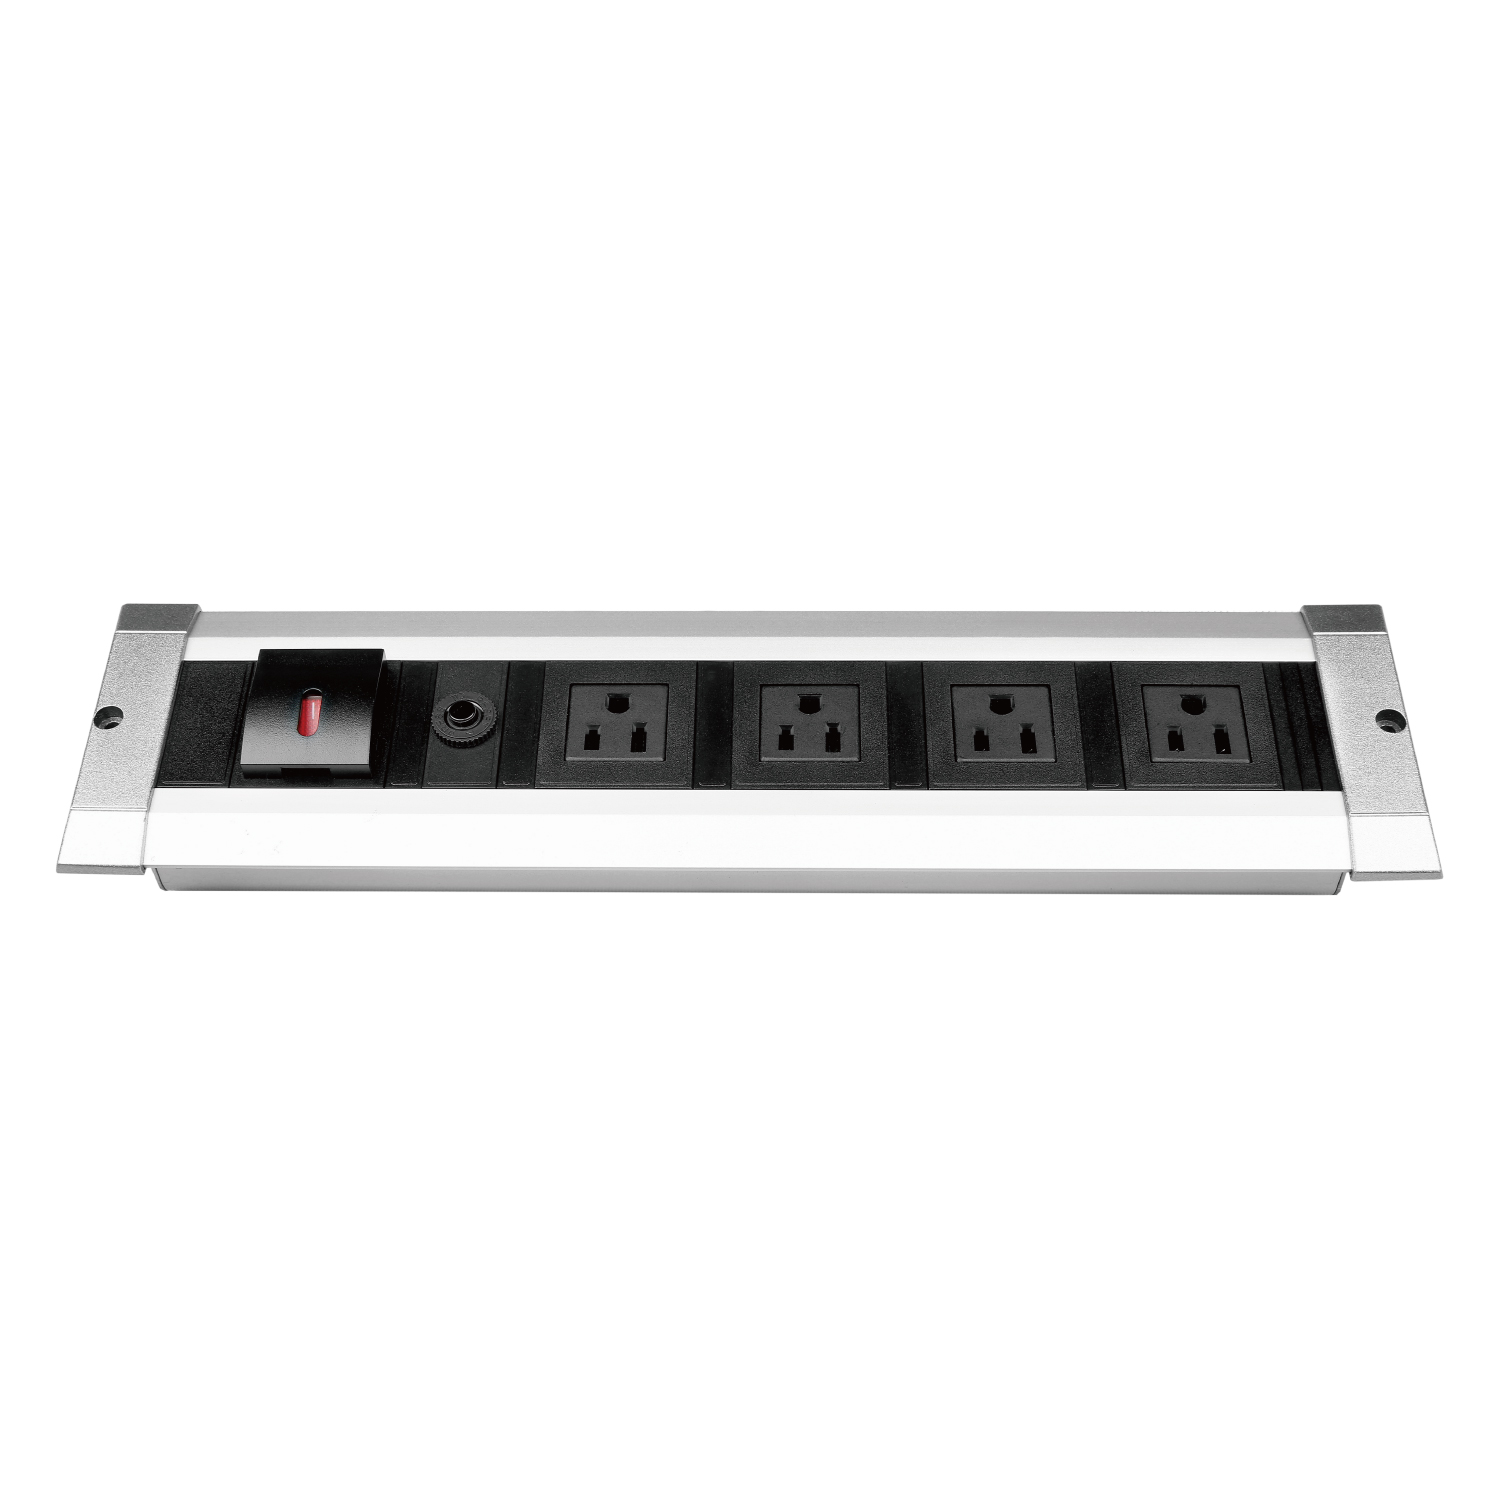 Desktop PDU 4-ports American standard with switch and overload